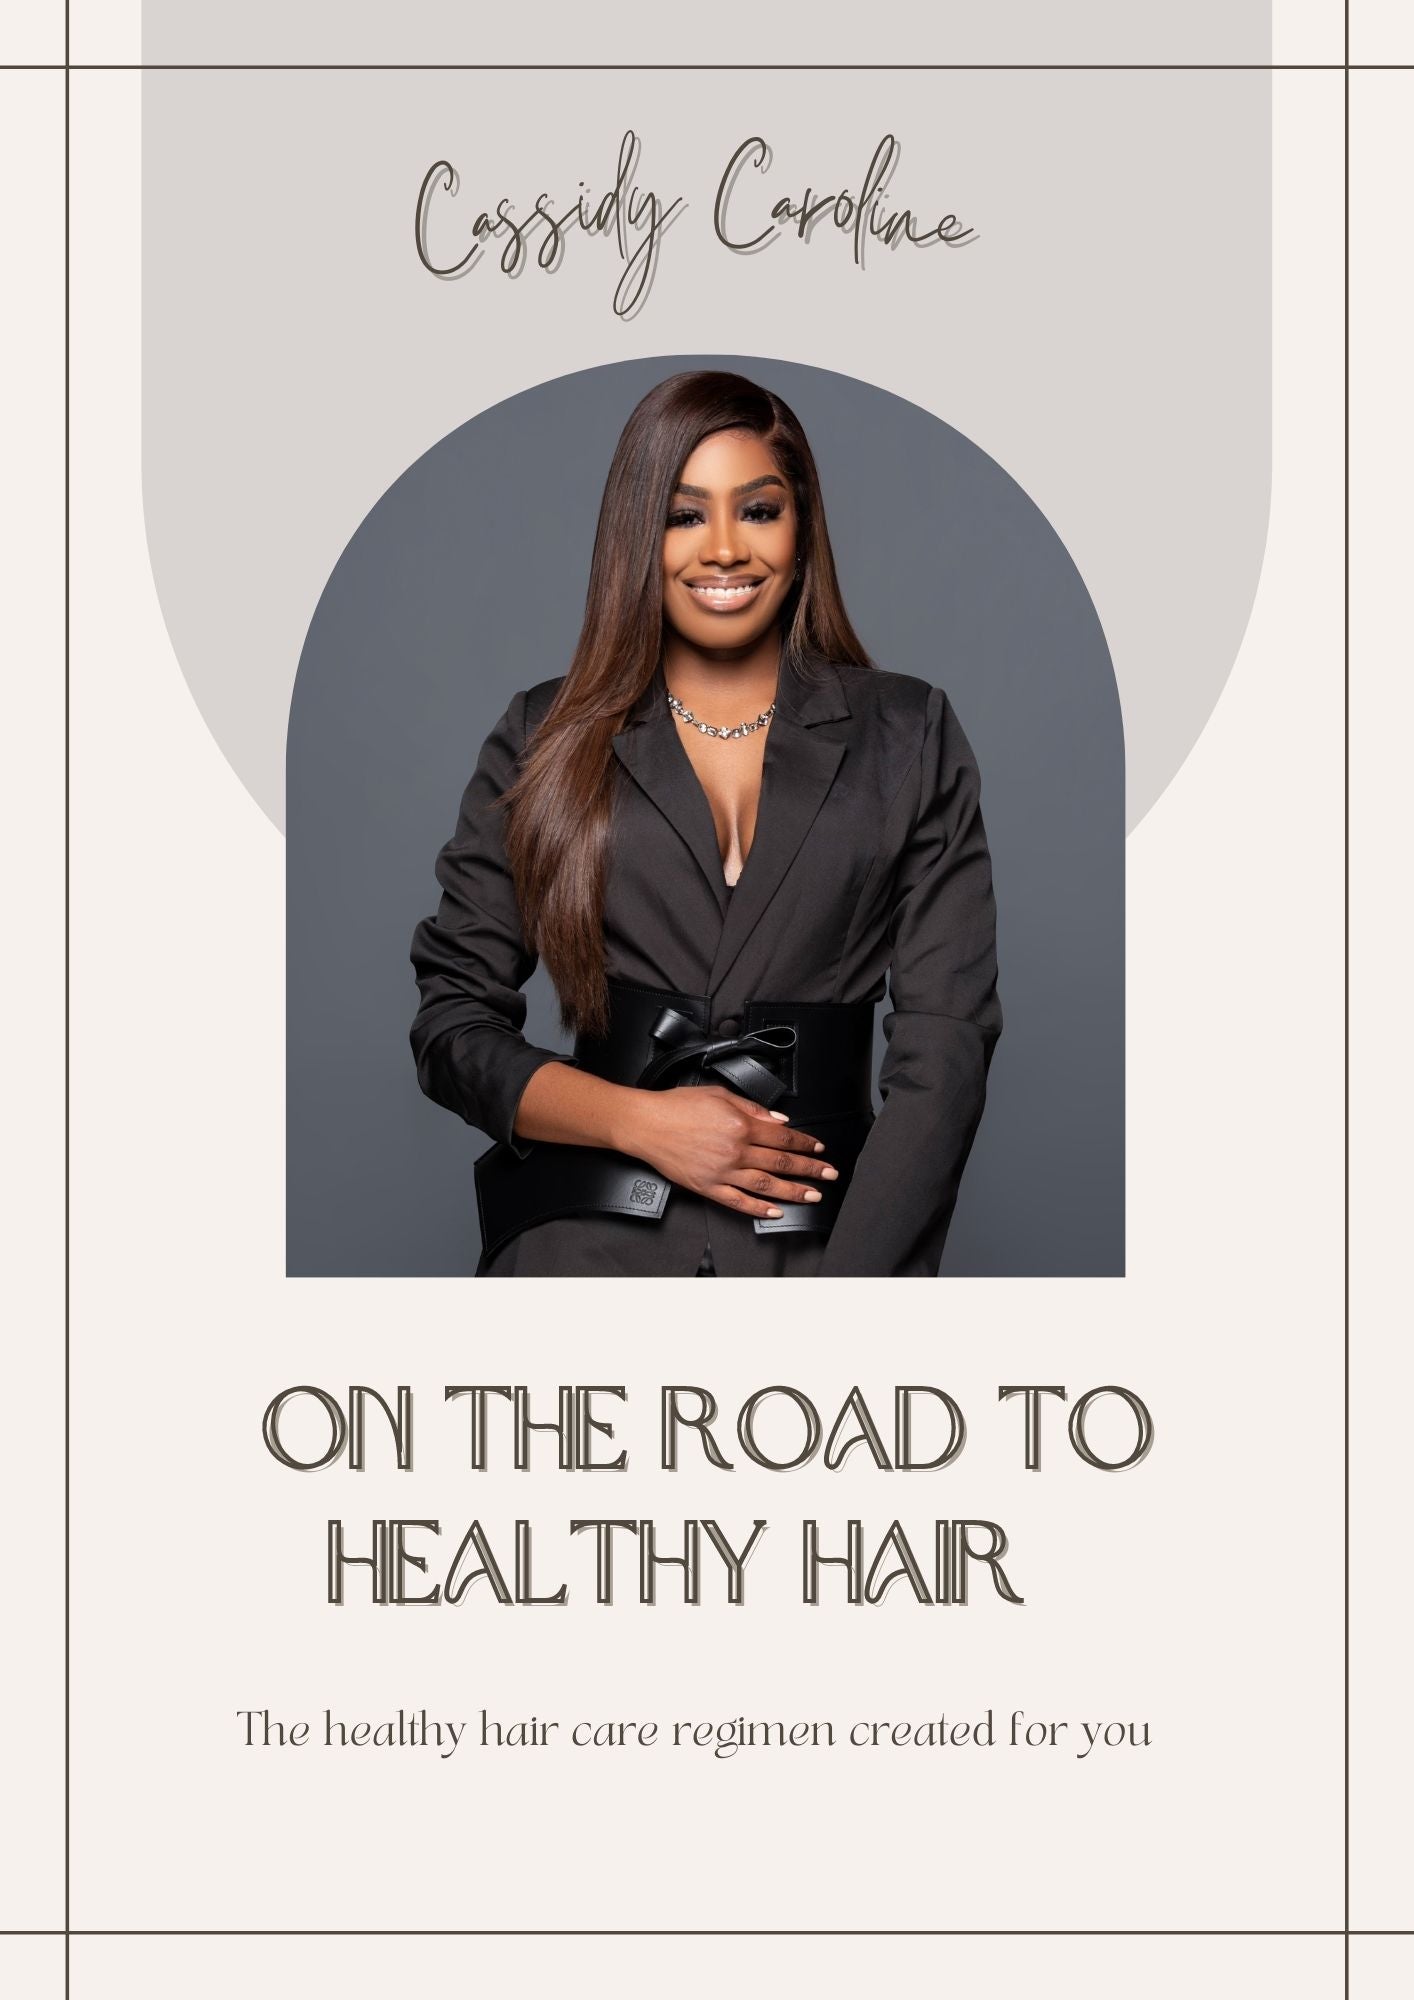 On the Road to Healthy Hair